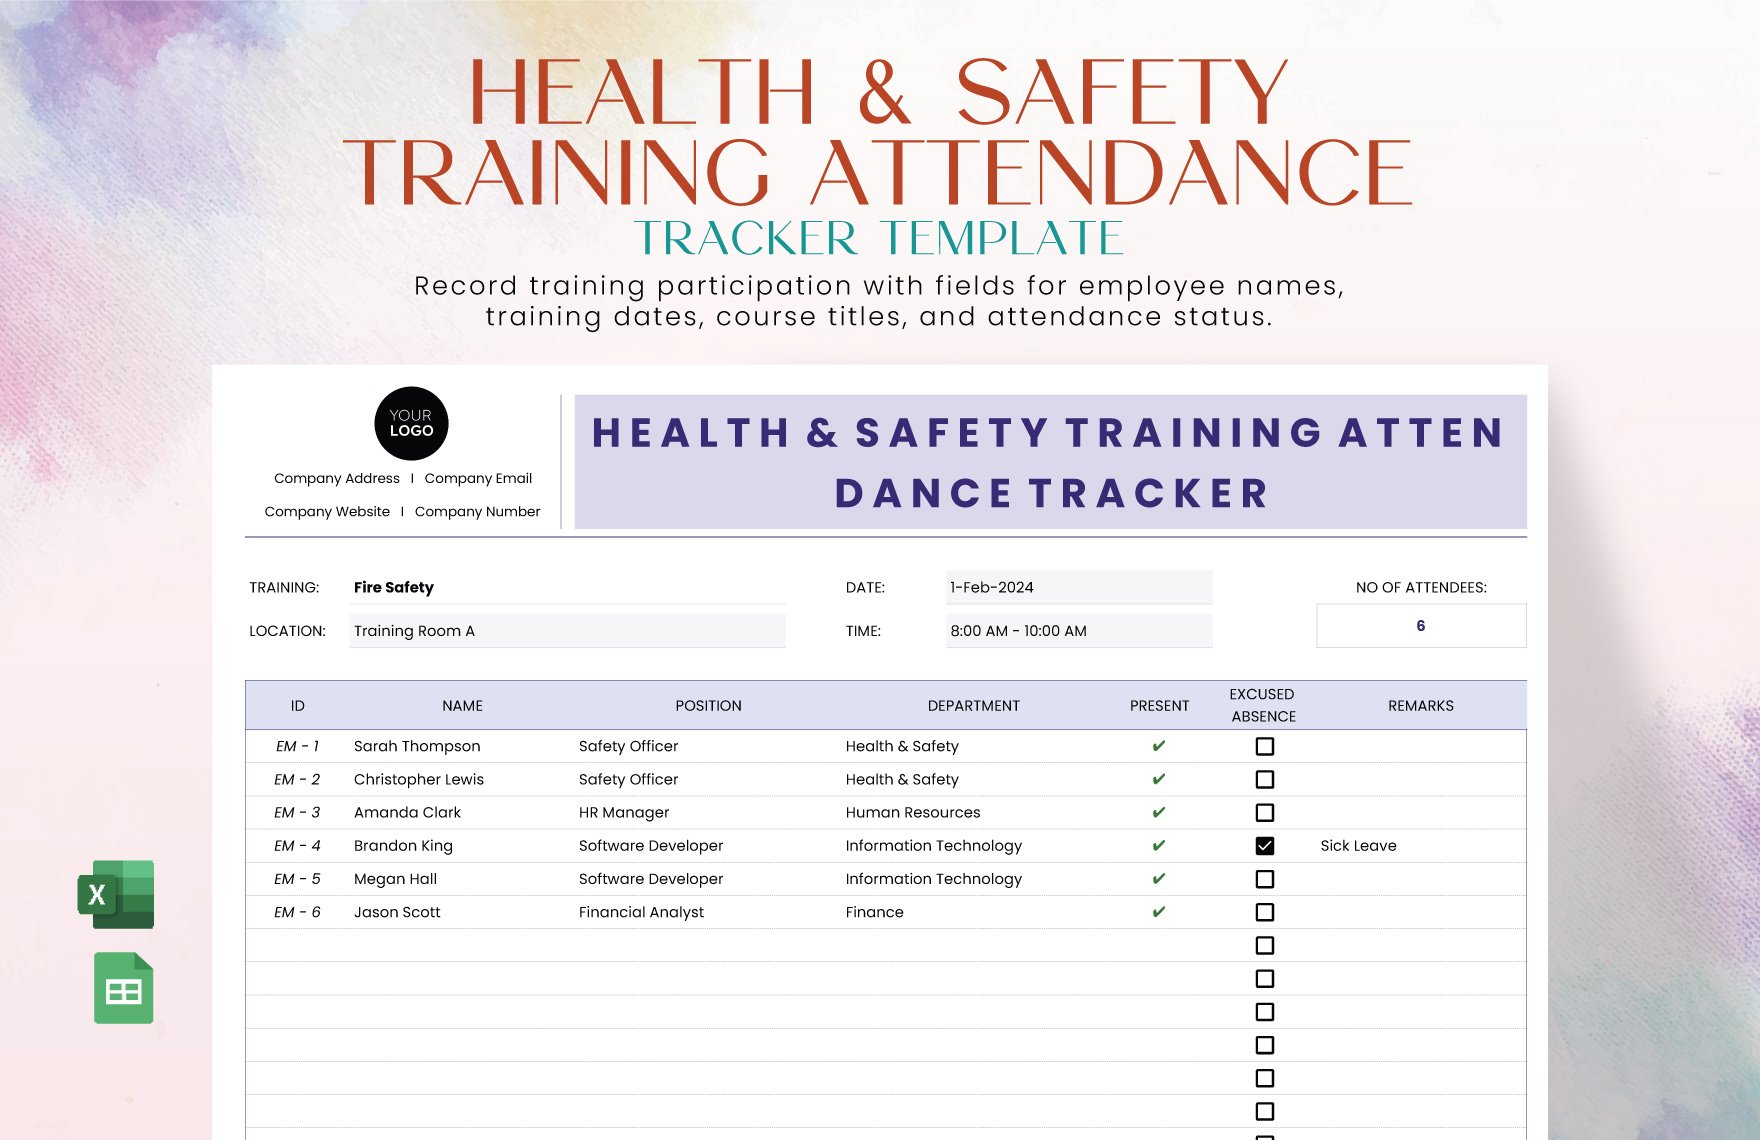 Health & Safety Training Attendance Tracker Template in Excel, Google Sheets